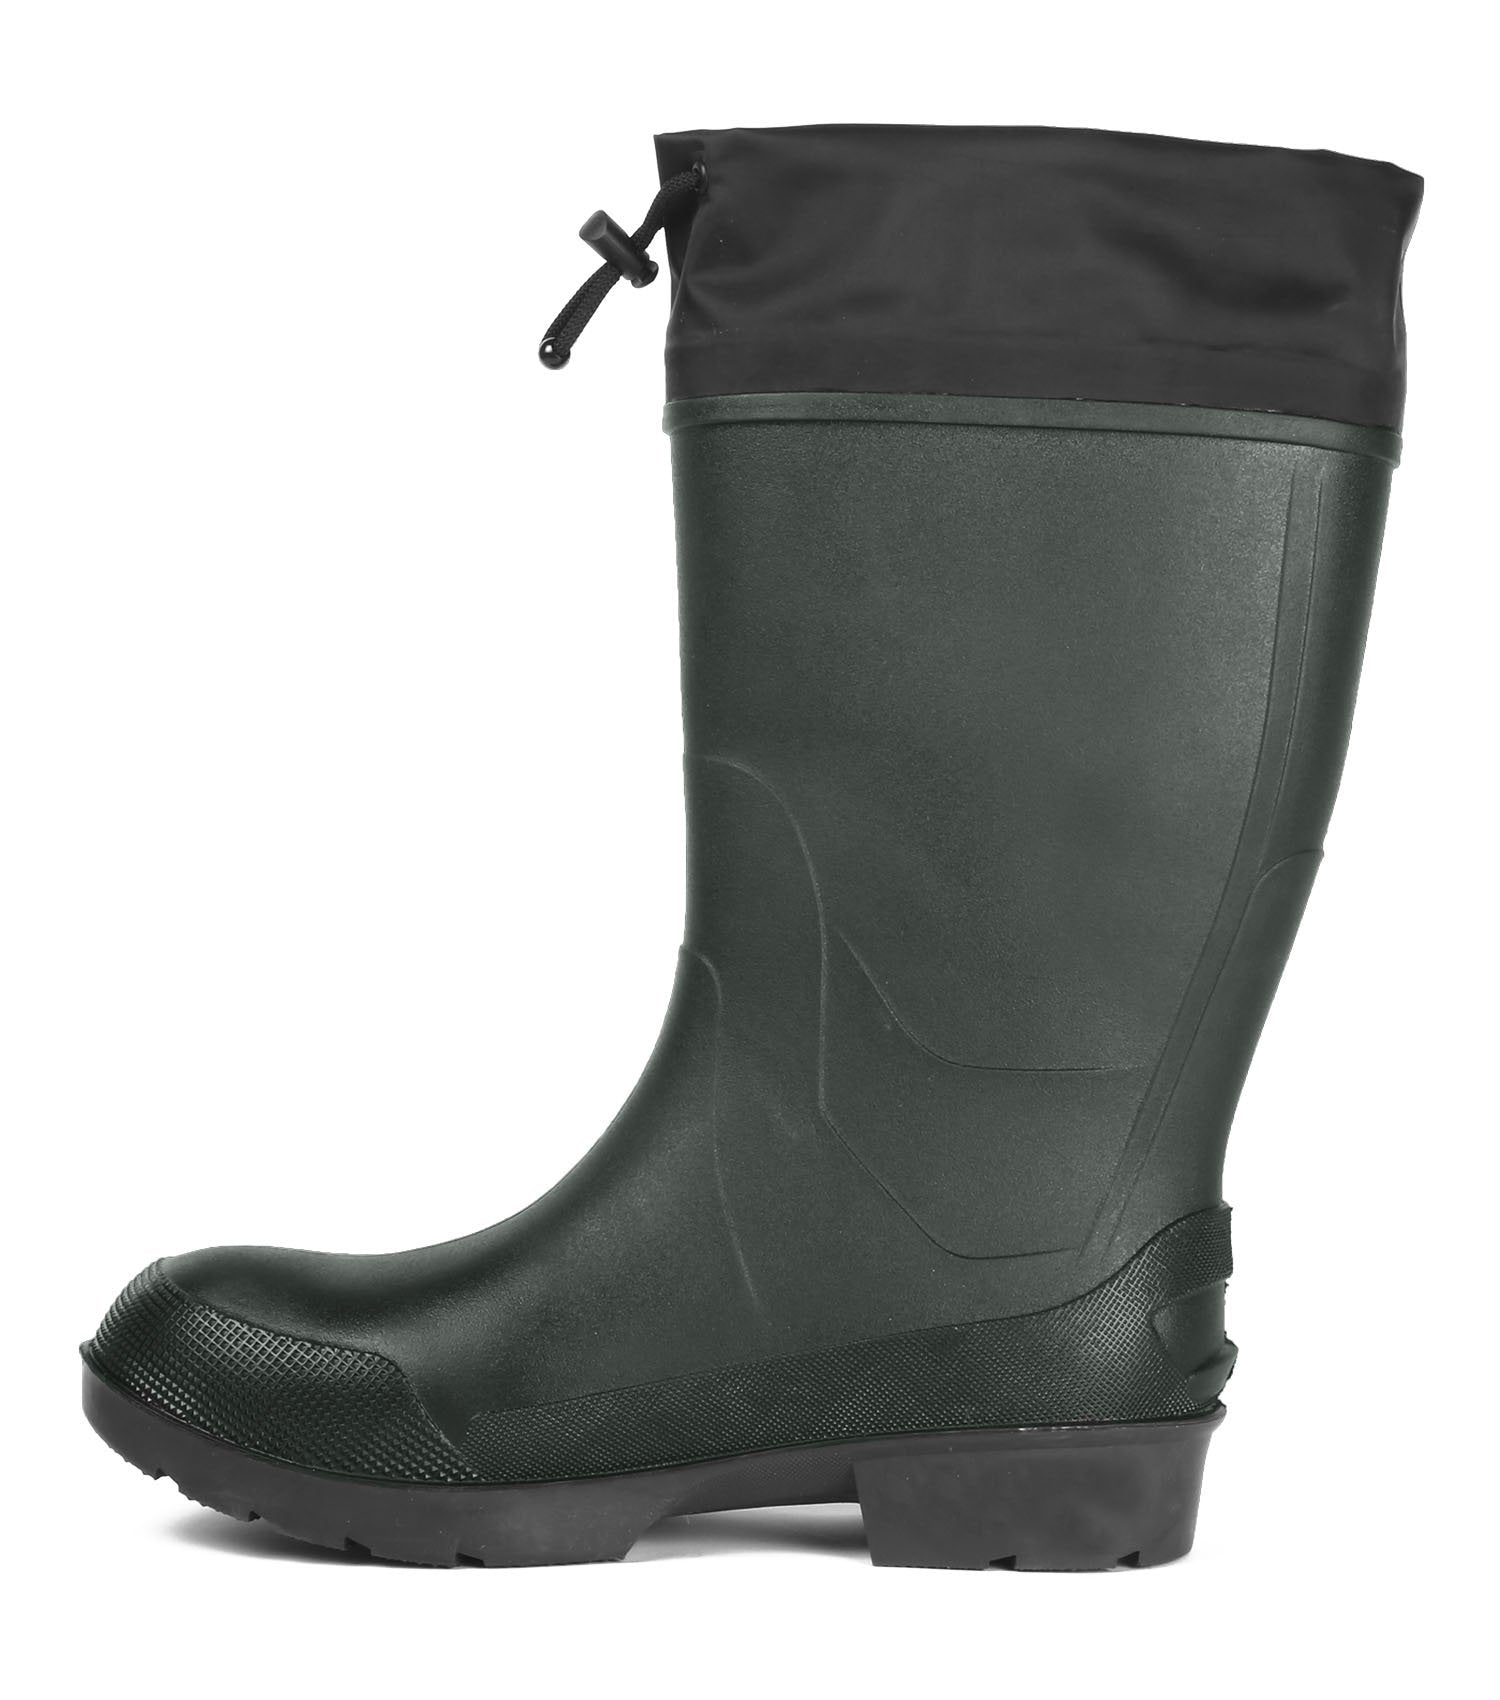 Acton Stormy 15" Insulated Rubber Work Boots | Green | Sizes 6 - 14 Work Boots - Cleanflow